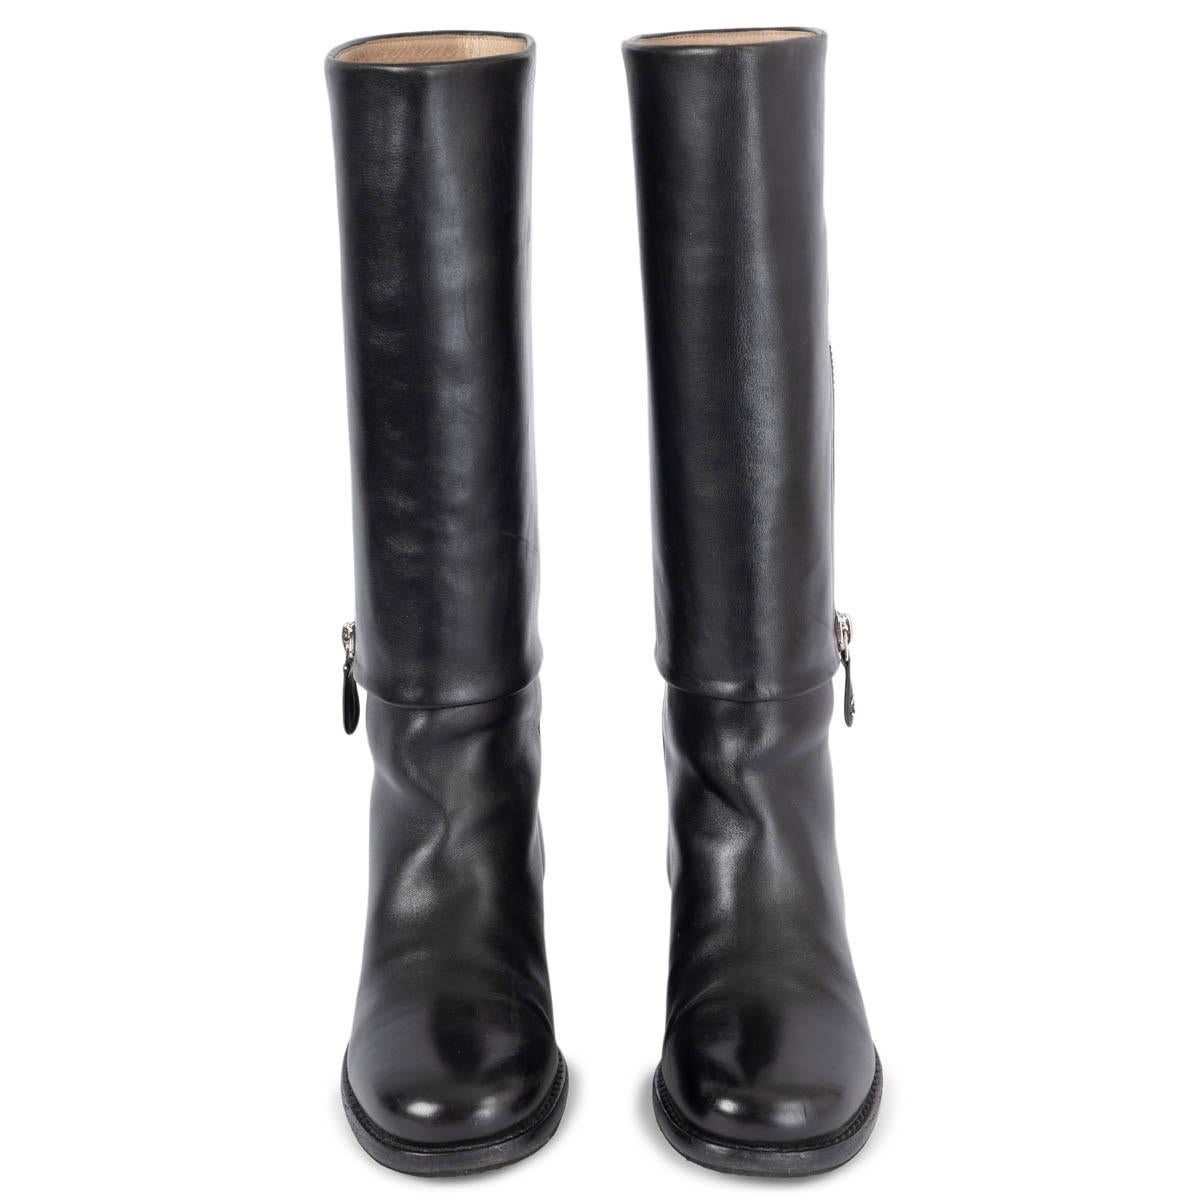 100% authentic Chanel riding boots in black smooth calfskin. The design features a silver-tone zipper detail on the side with CC logo pull tab. Have been worn and are in excellent condition. Rubber sole got added. 

2012 Paris-Bombay Metiers